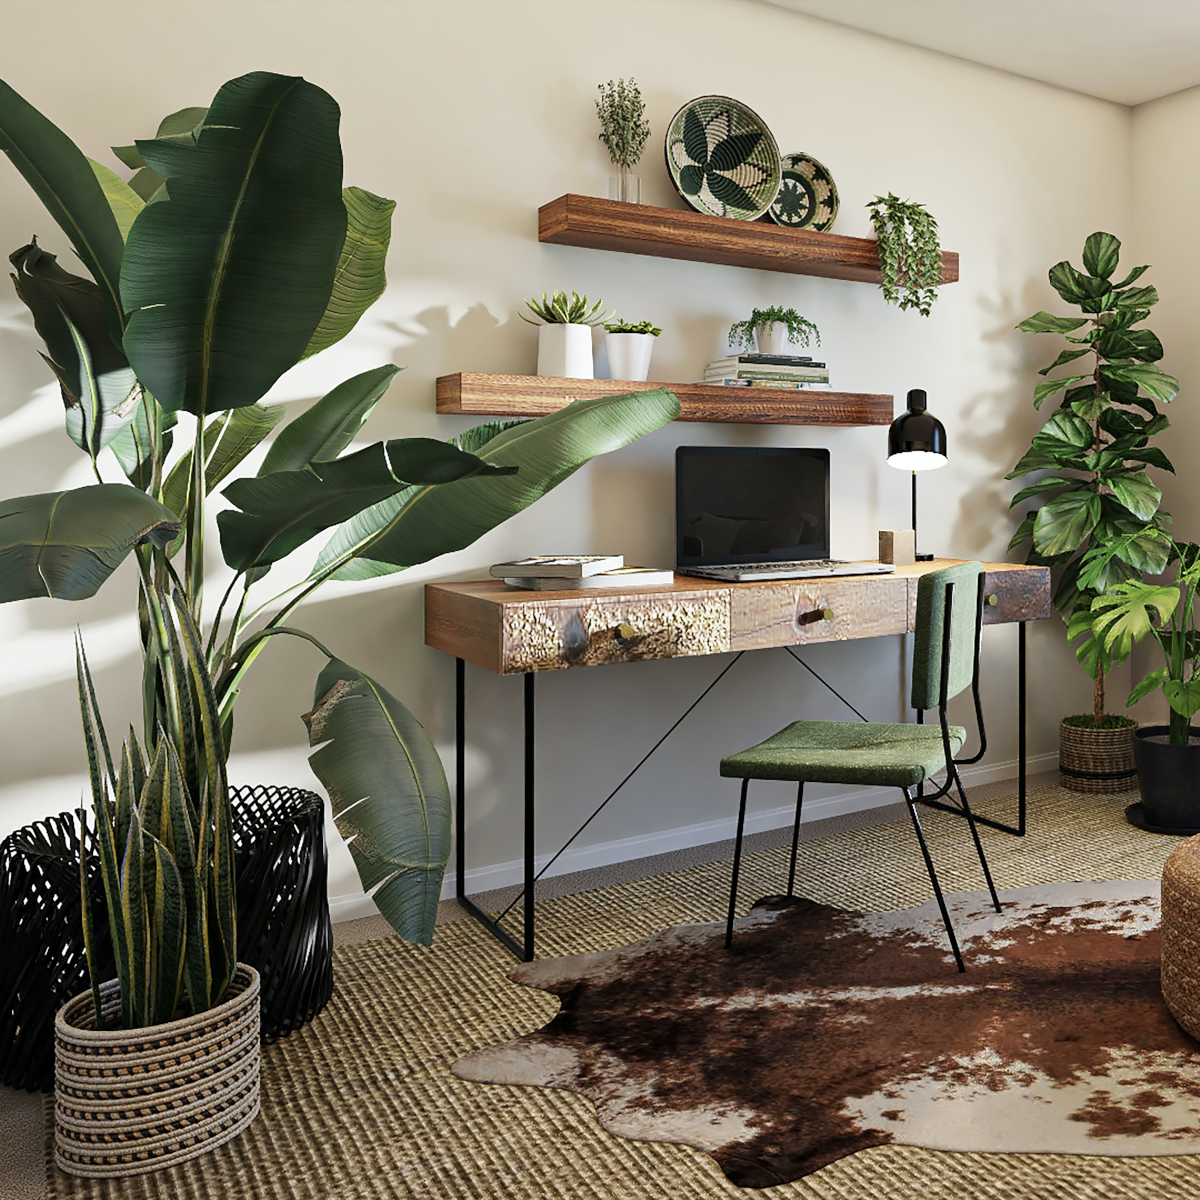 3 Large Indoor Plants To Enhance Your Home Décor